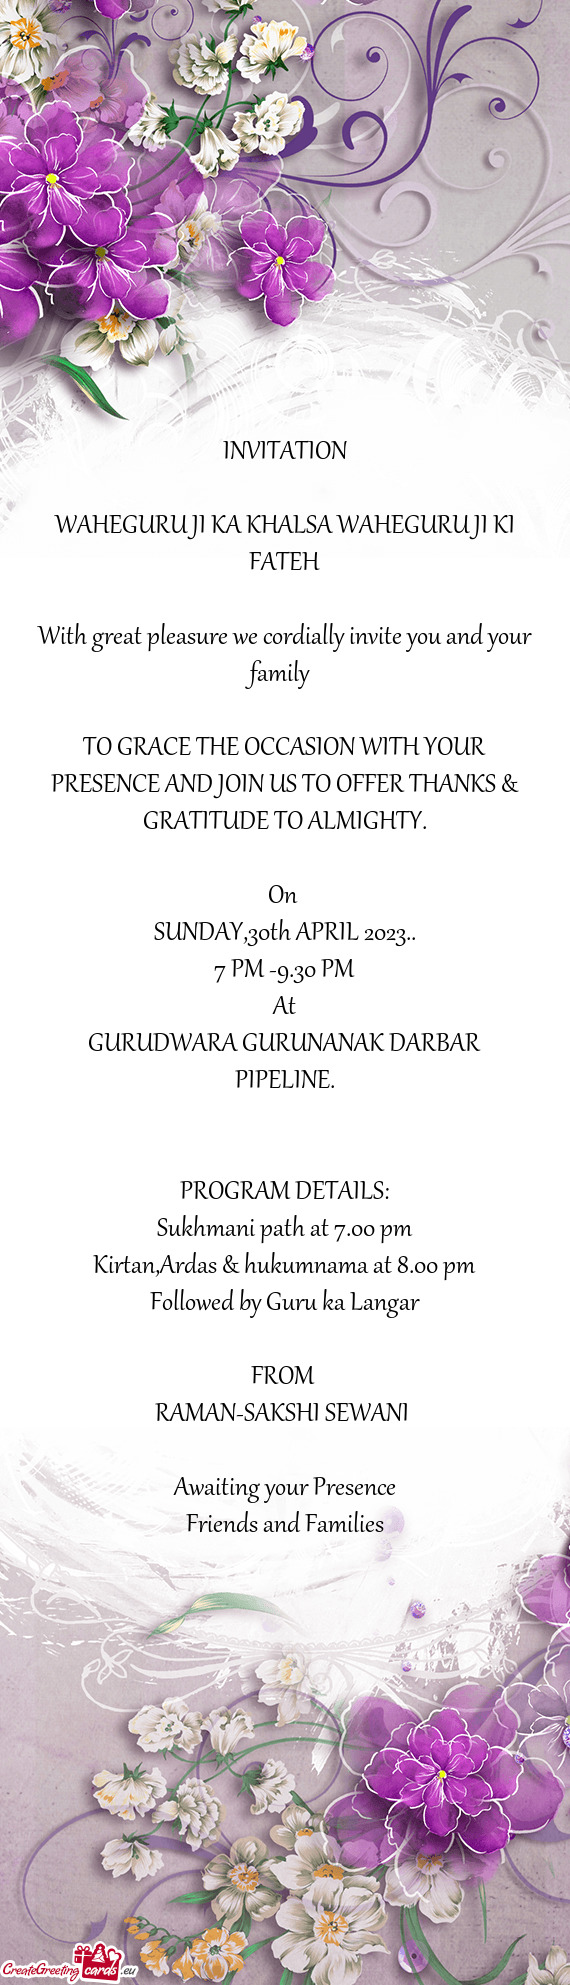 TO GRACE THE OCCASION WITH YOUR PRESENCE AND JOIN US TO OFFER THANKS & GRATITUDE TO ALMIGHTY